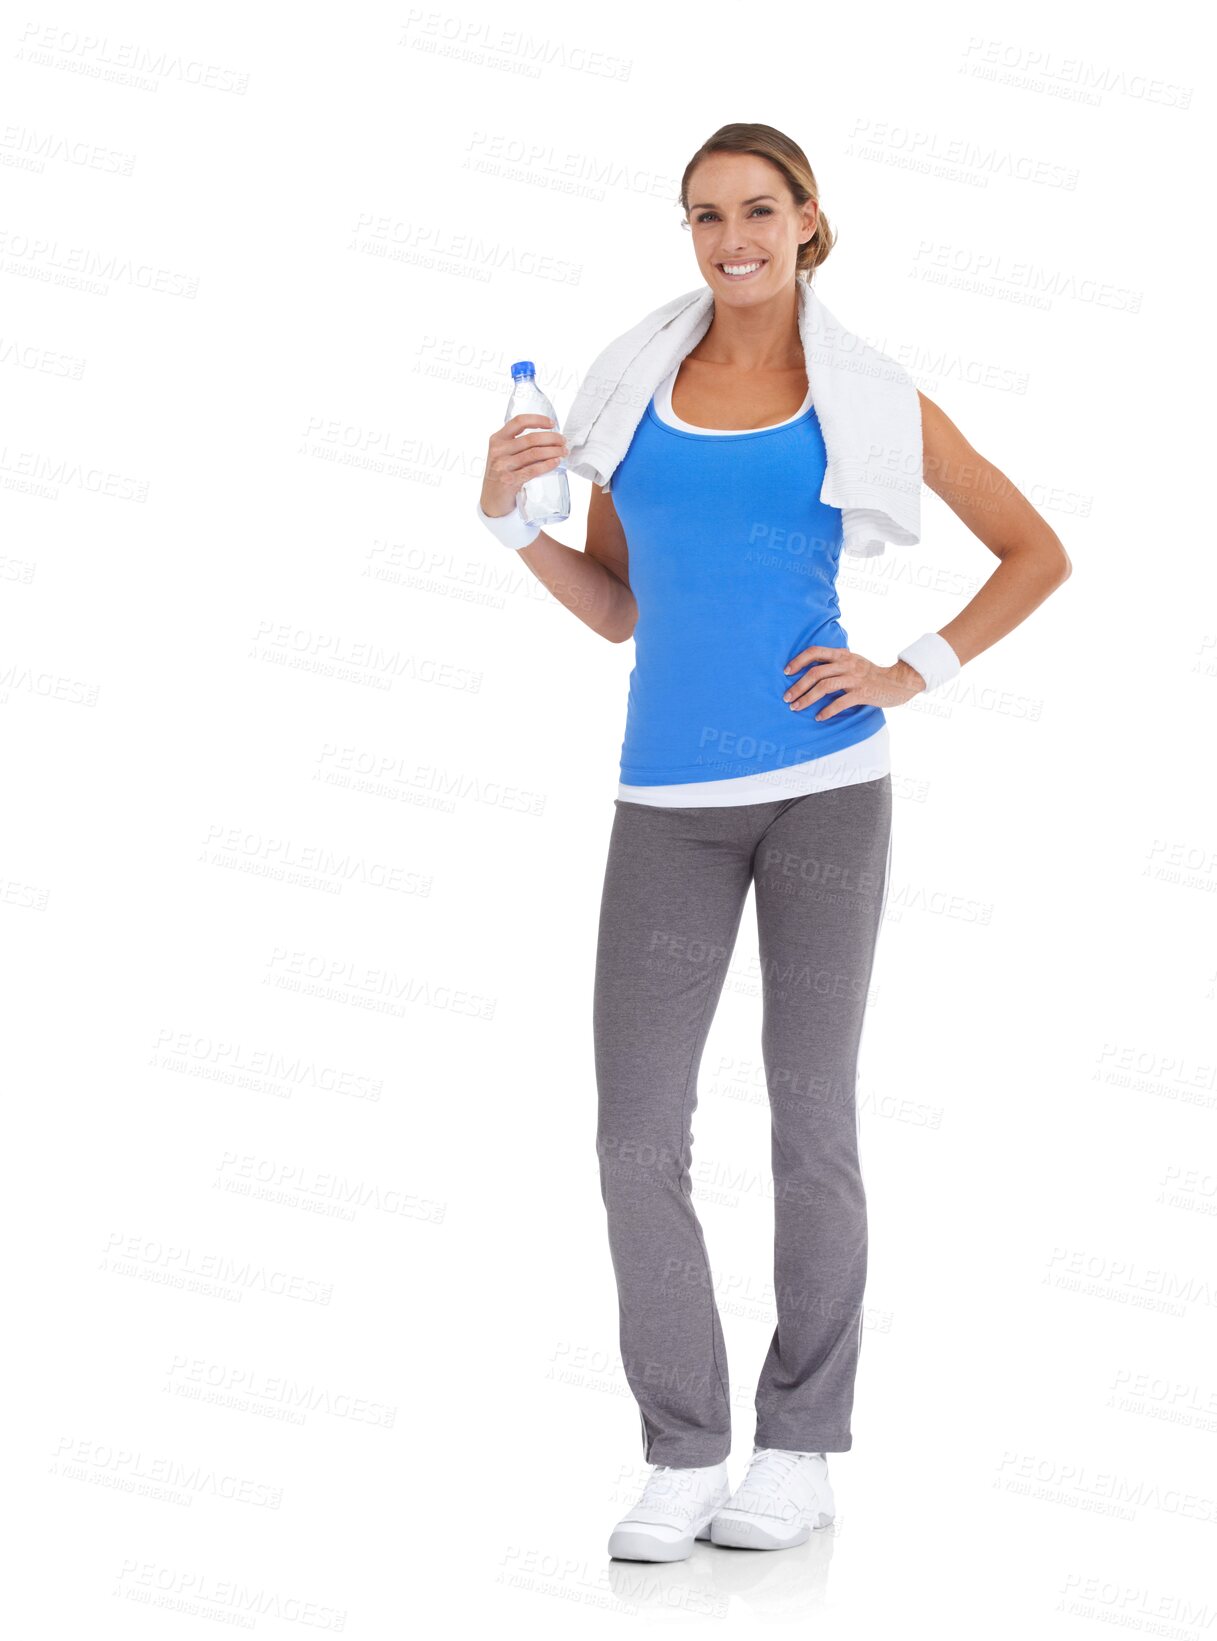 Buy stock photo Fitness towel, portrait and woman with water isolated on a transparent png background. Sports, bottle and happy athlete with drink for healthy nutrition after exercise, workout or wellness training.